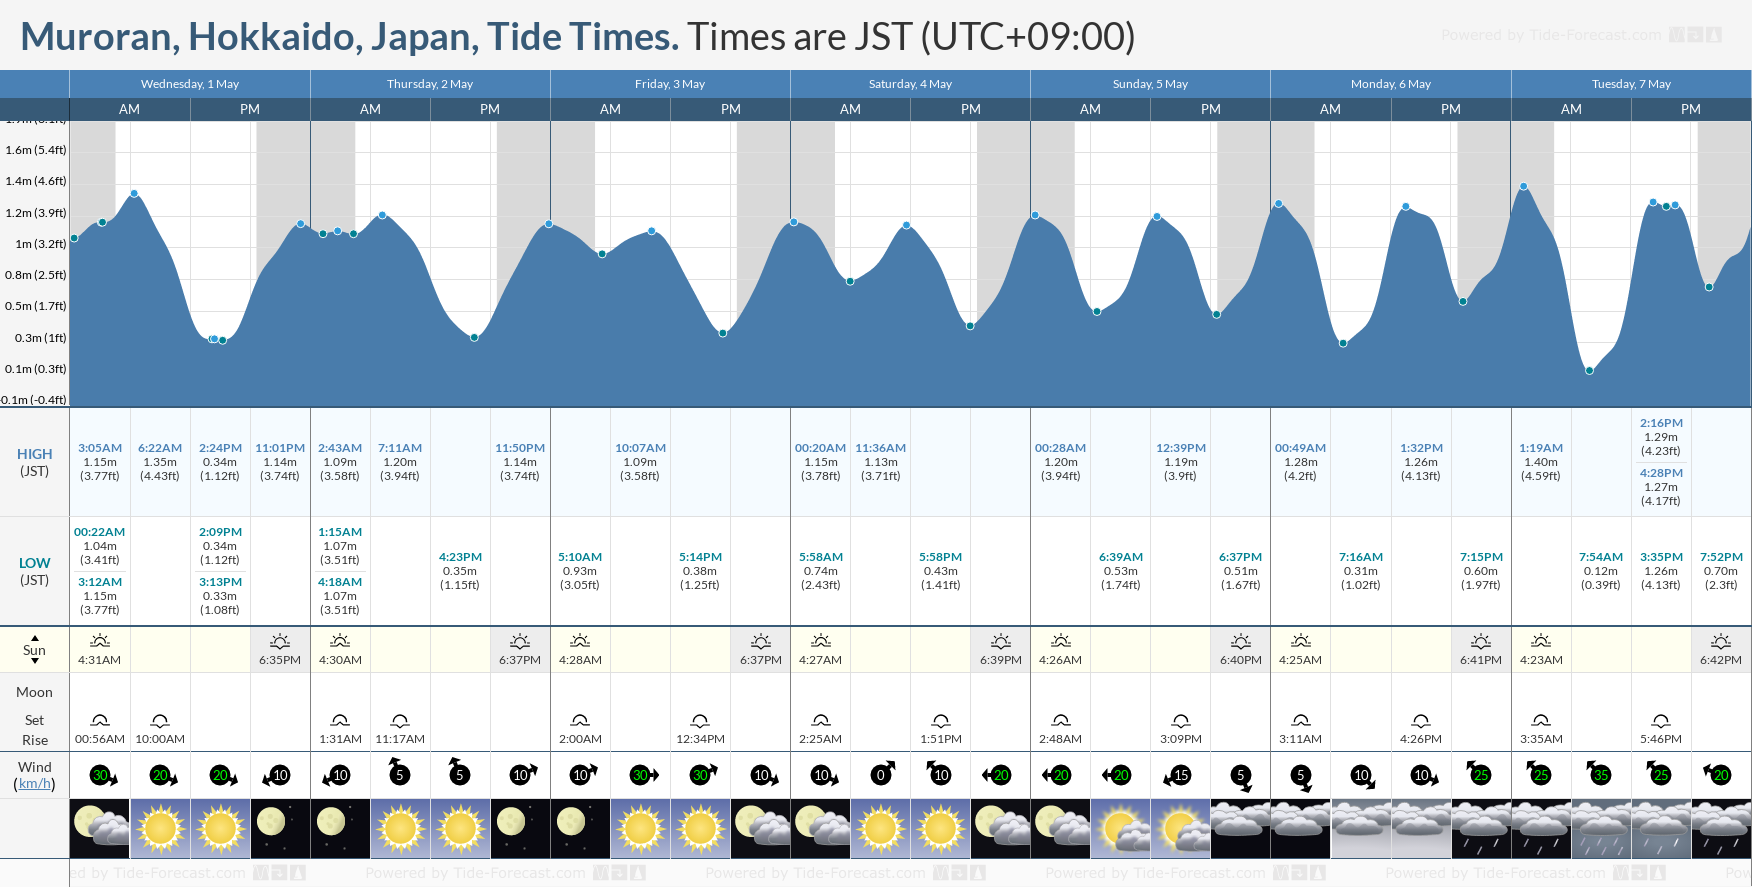 Muroran, Hokkaido, Japan Tide Chart including high and low tide tide times for the next 7 days